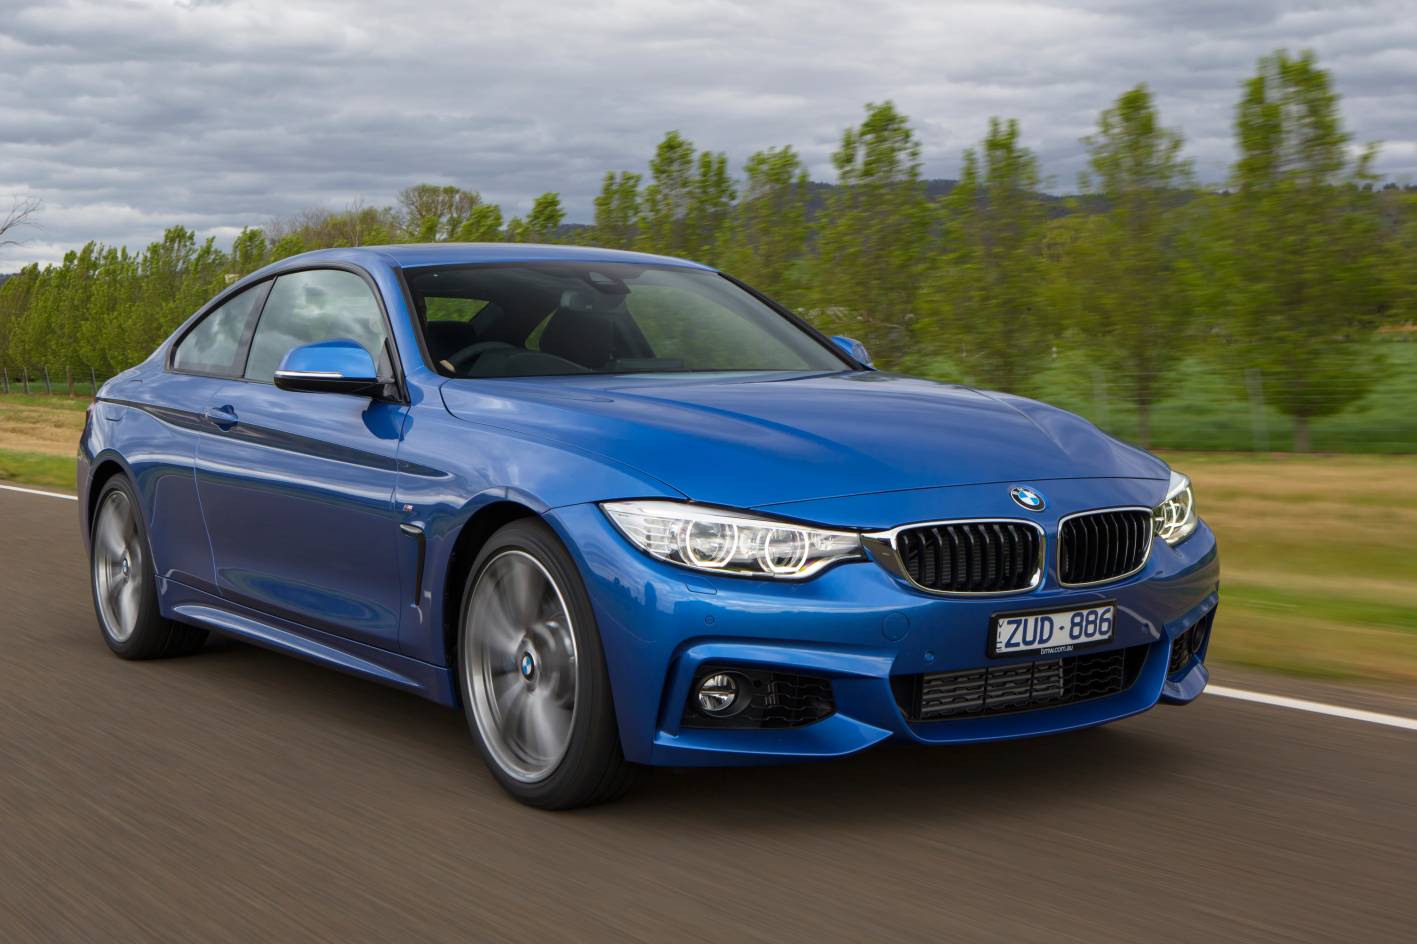 BMW 4 Series now on sale in Australia from $69,500